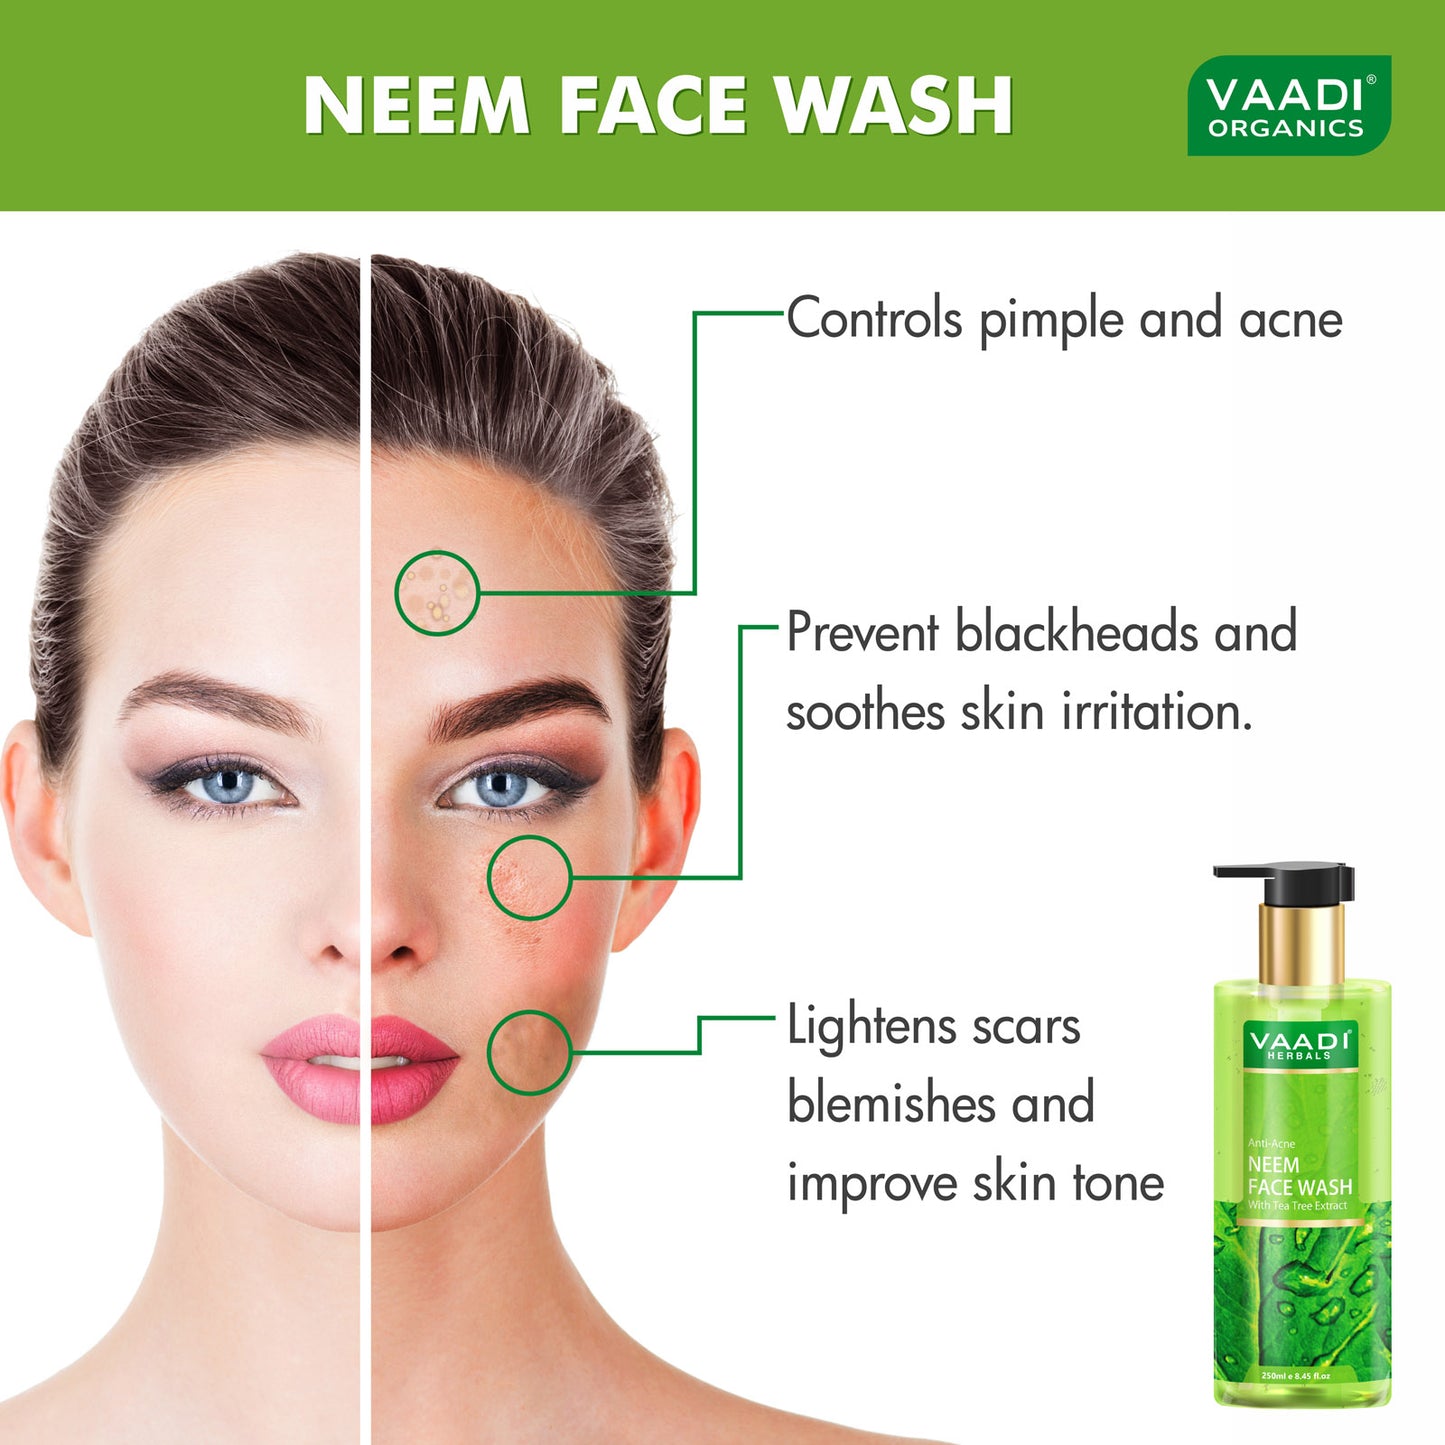 Pack of 2 Anti-Acne Neem Face Wash With Tea Tree Extract (2 x 250 ml)